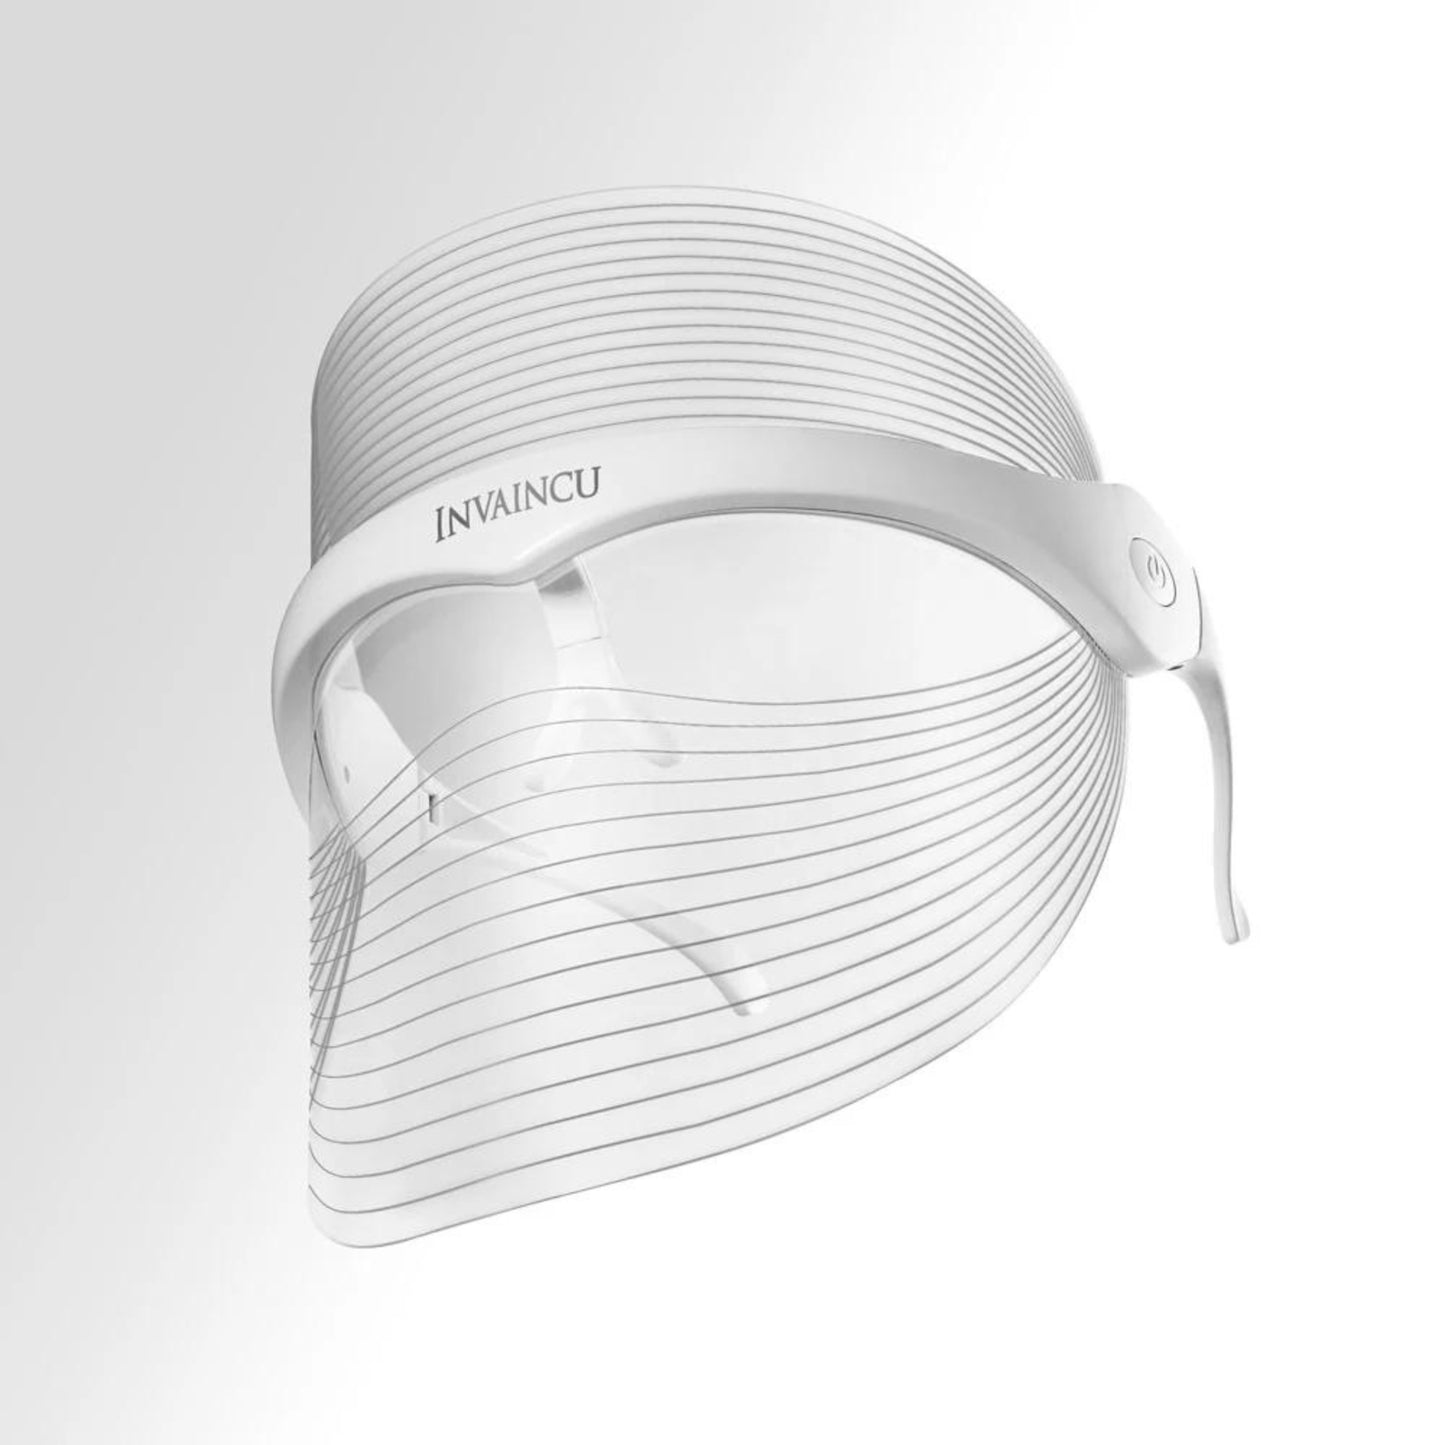 7-in-1 LED Light Therapy Mask